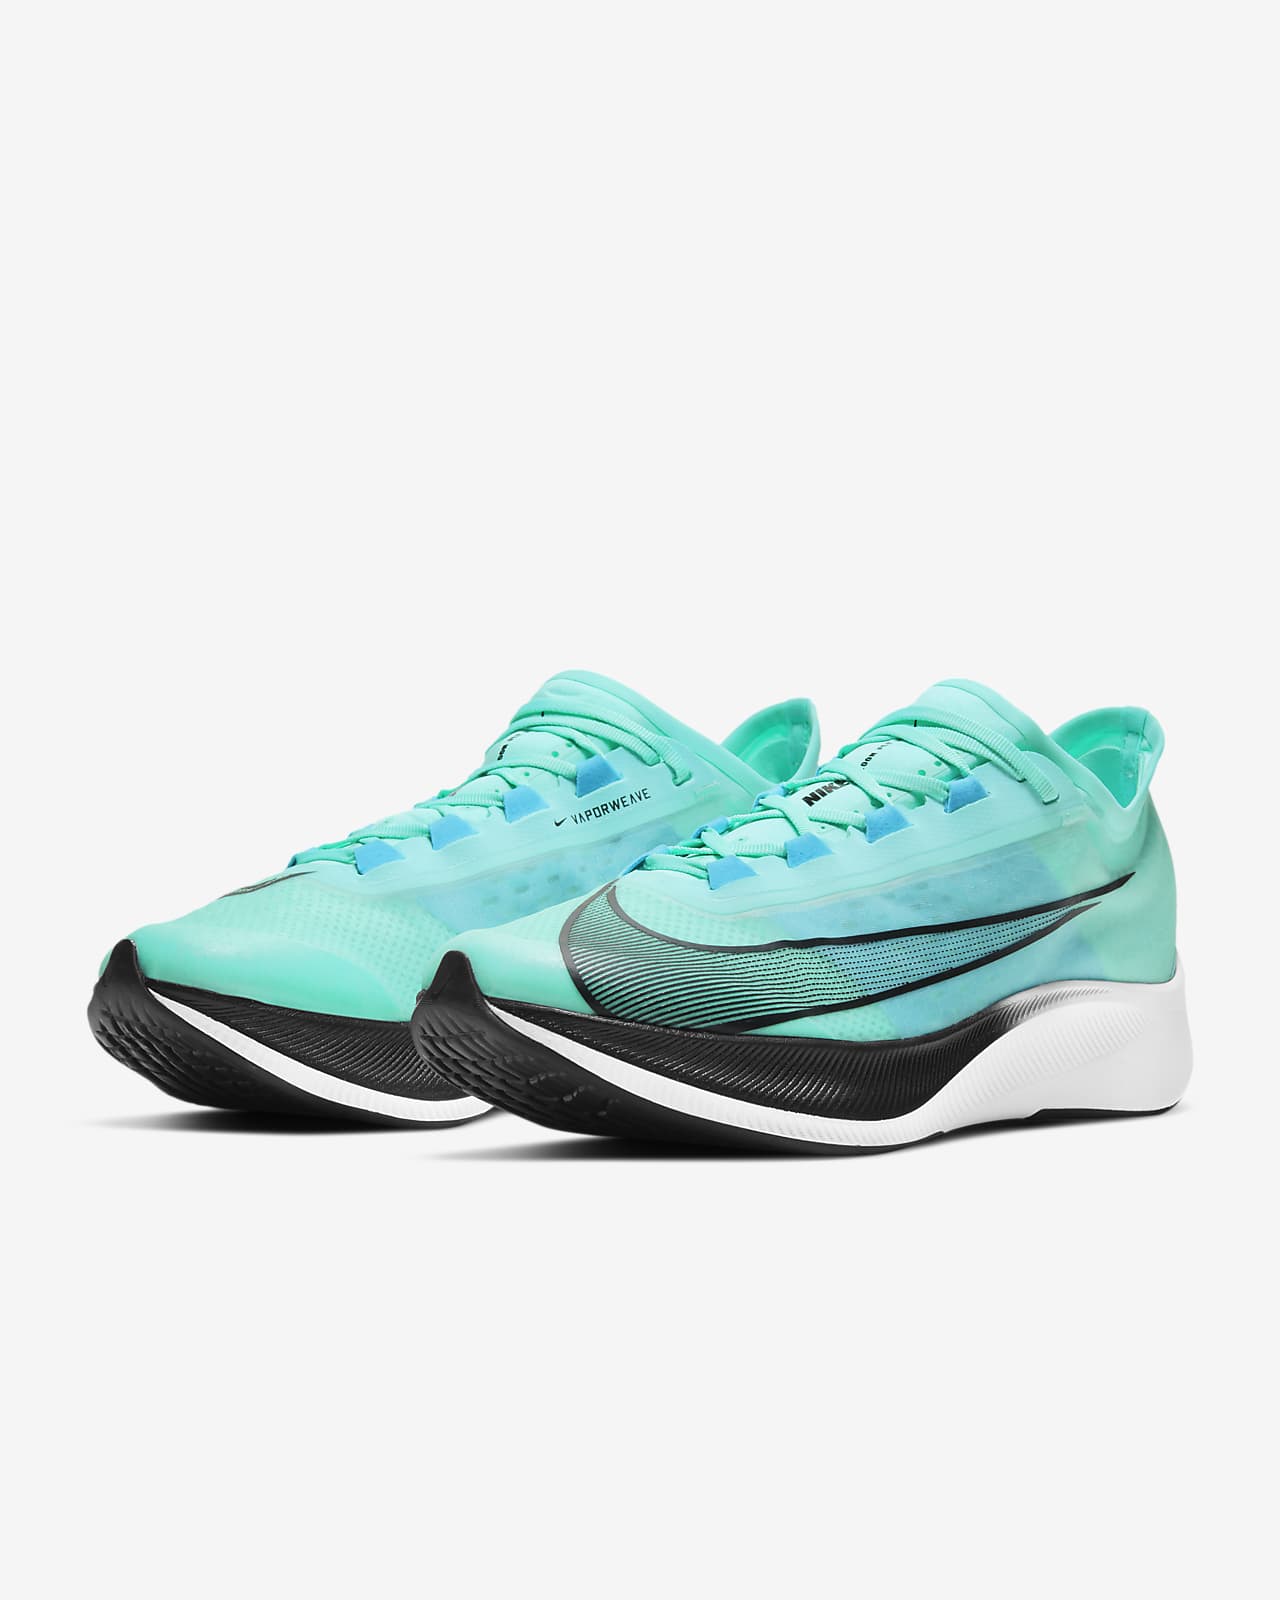 nike zoom fly 3 fit true to size